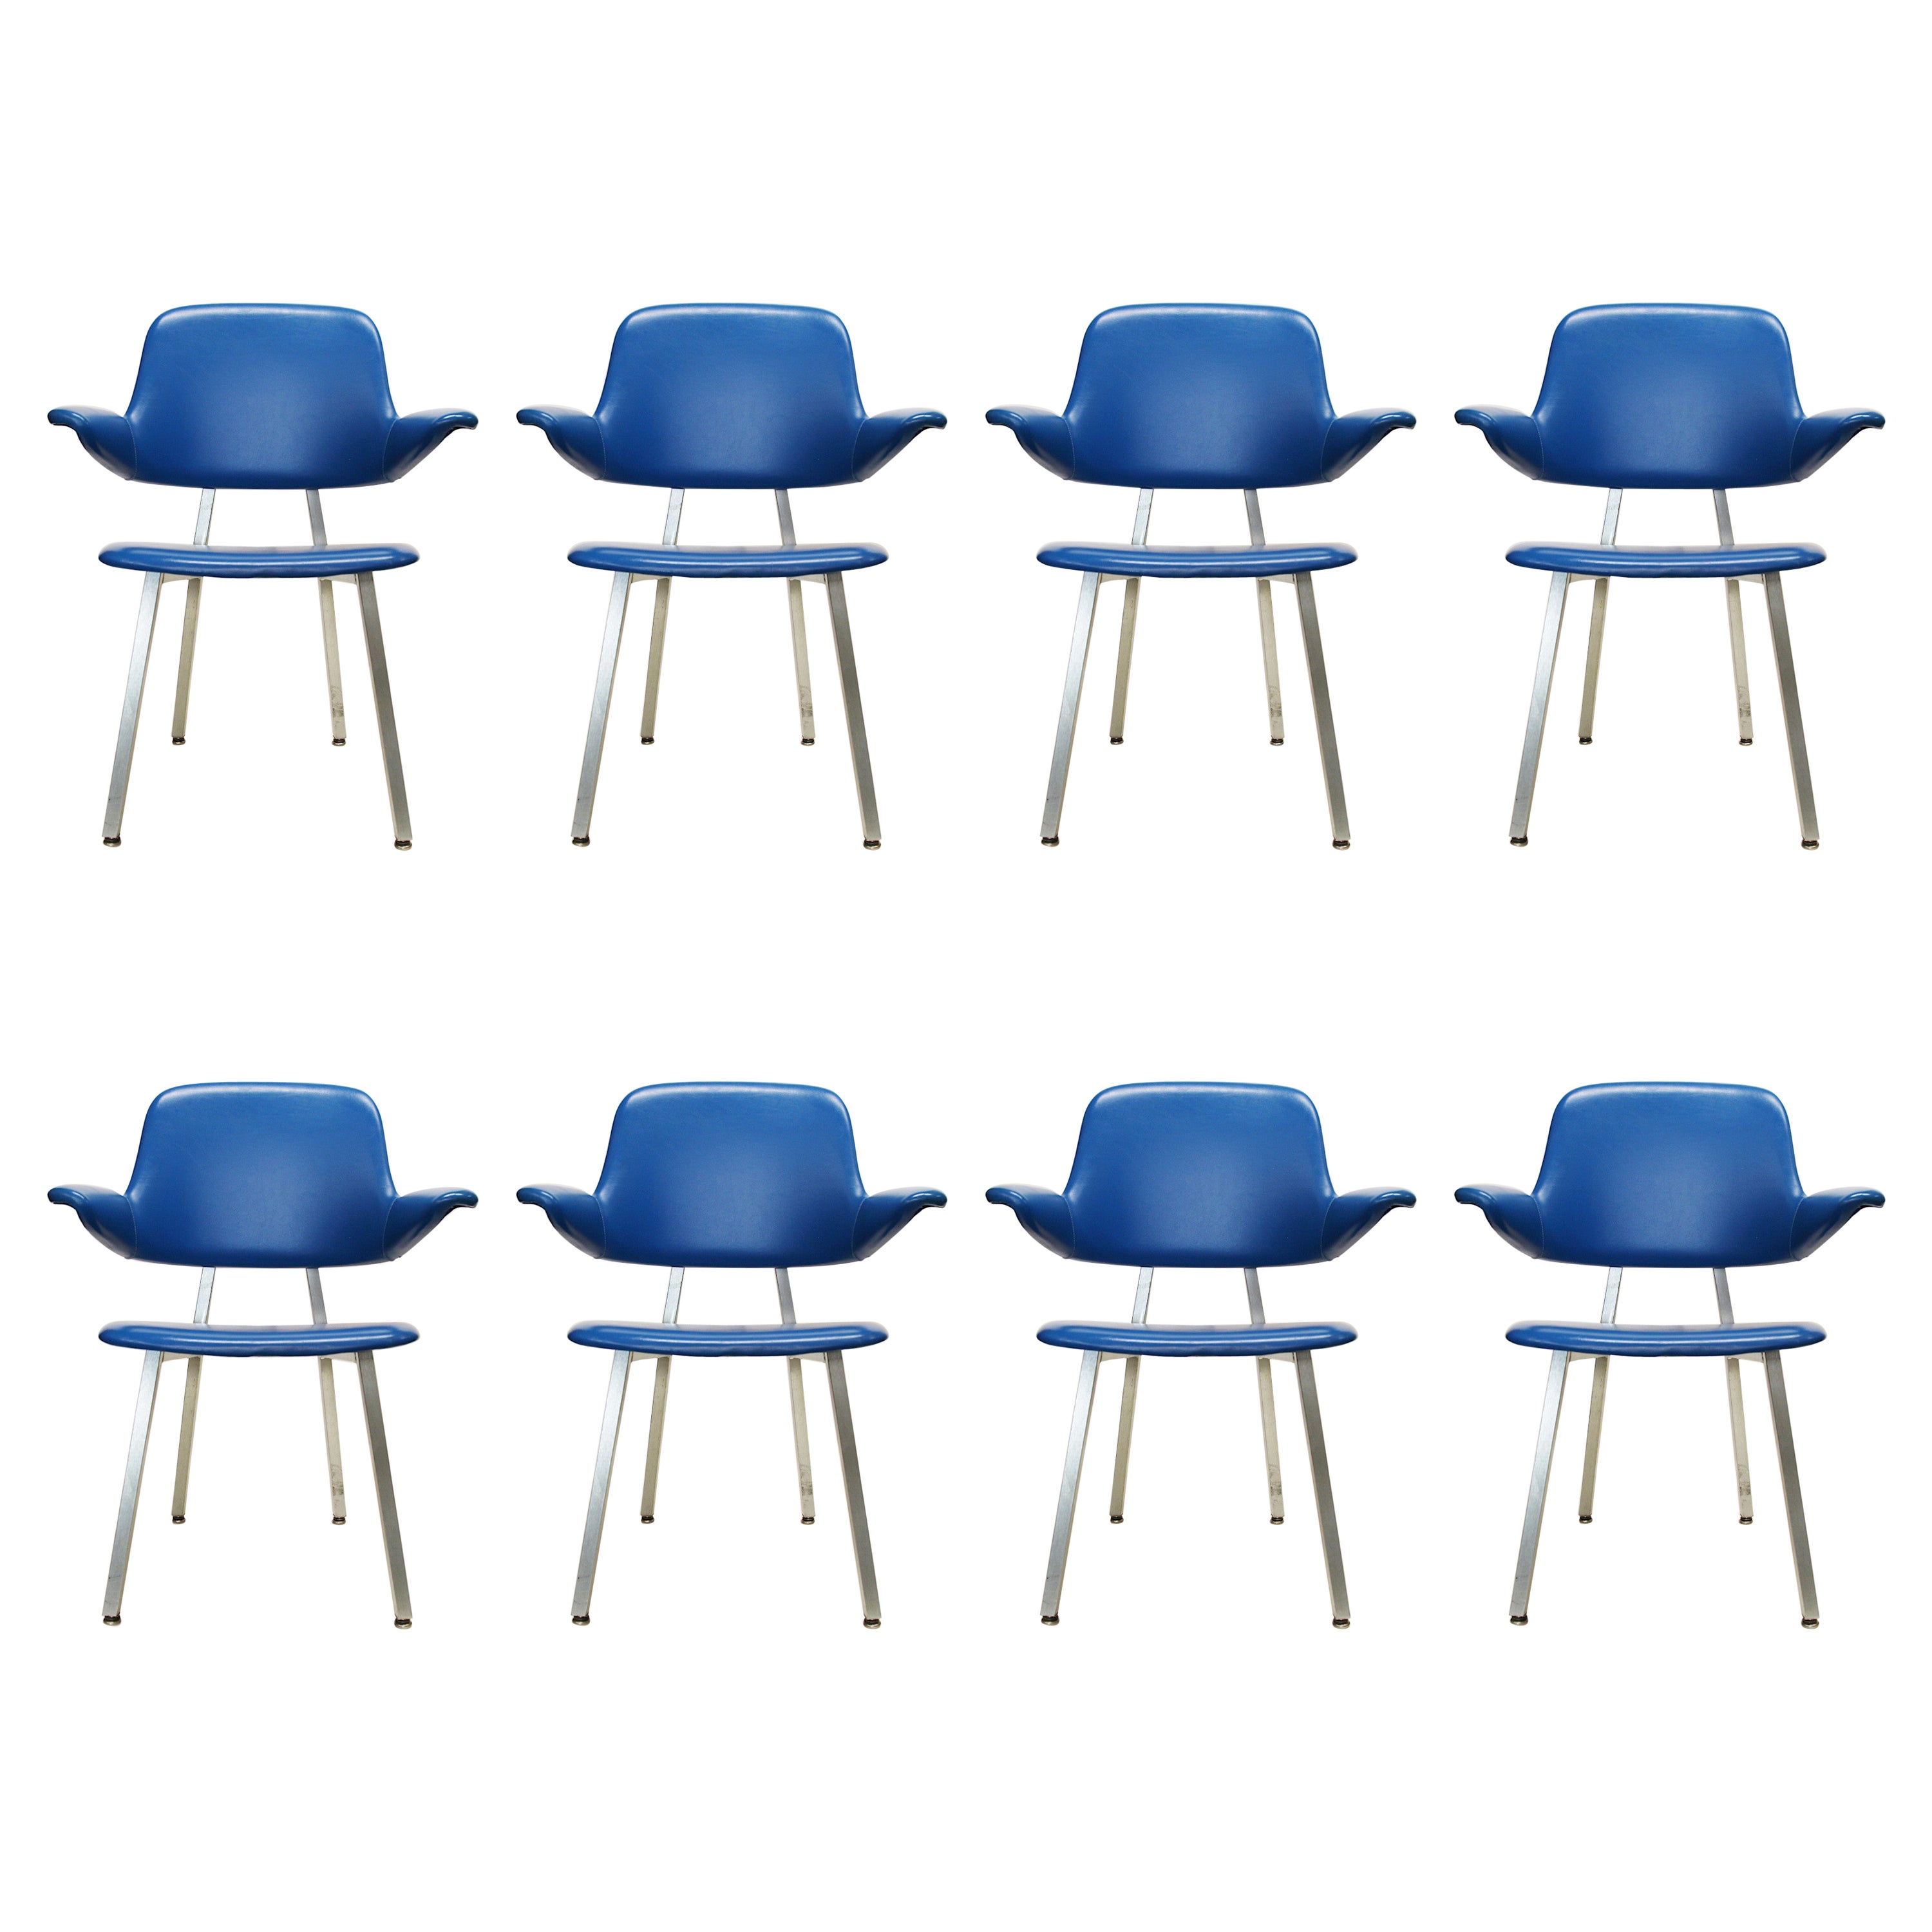 Set of 8 Mid-Century Modern Blue Vinyl Model 420 Dining Chairs by Shaw Walker